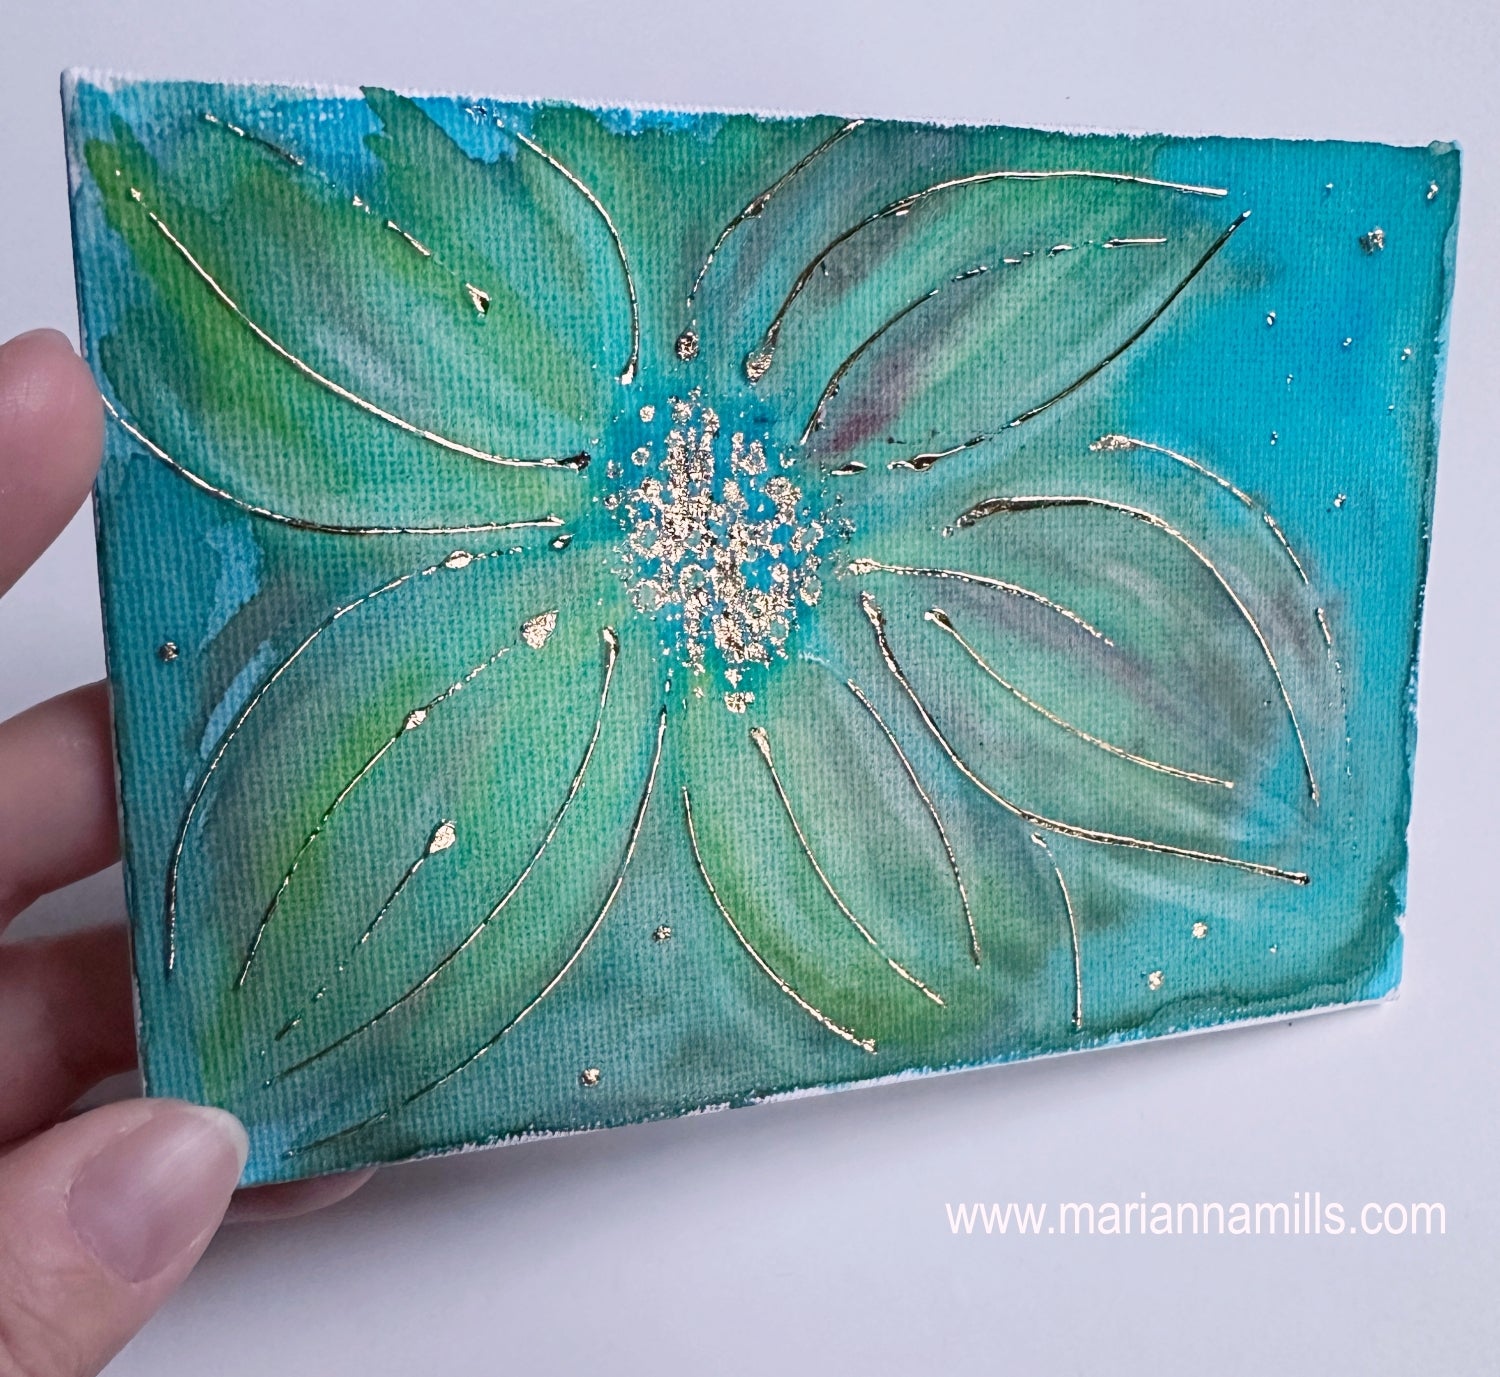 Flower Vol. 5  4"x6" mixed media painting by Marianna Mills